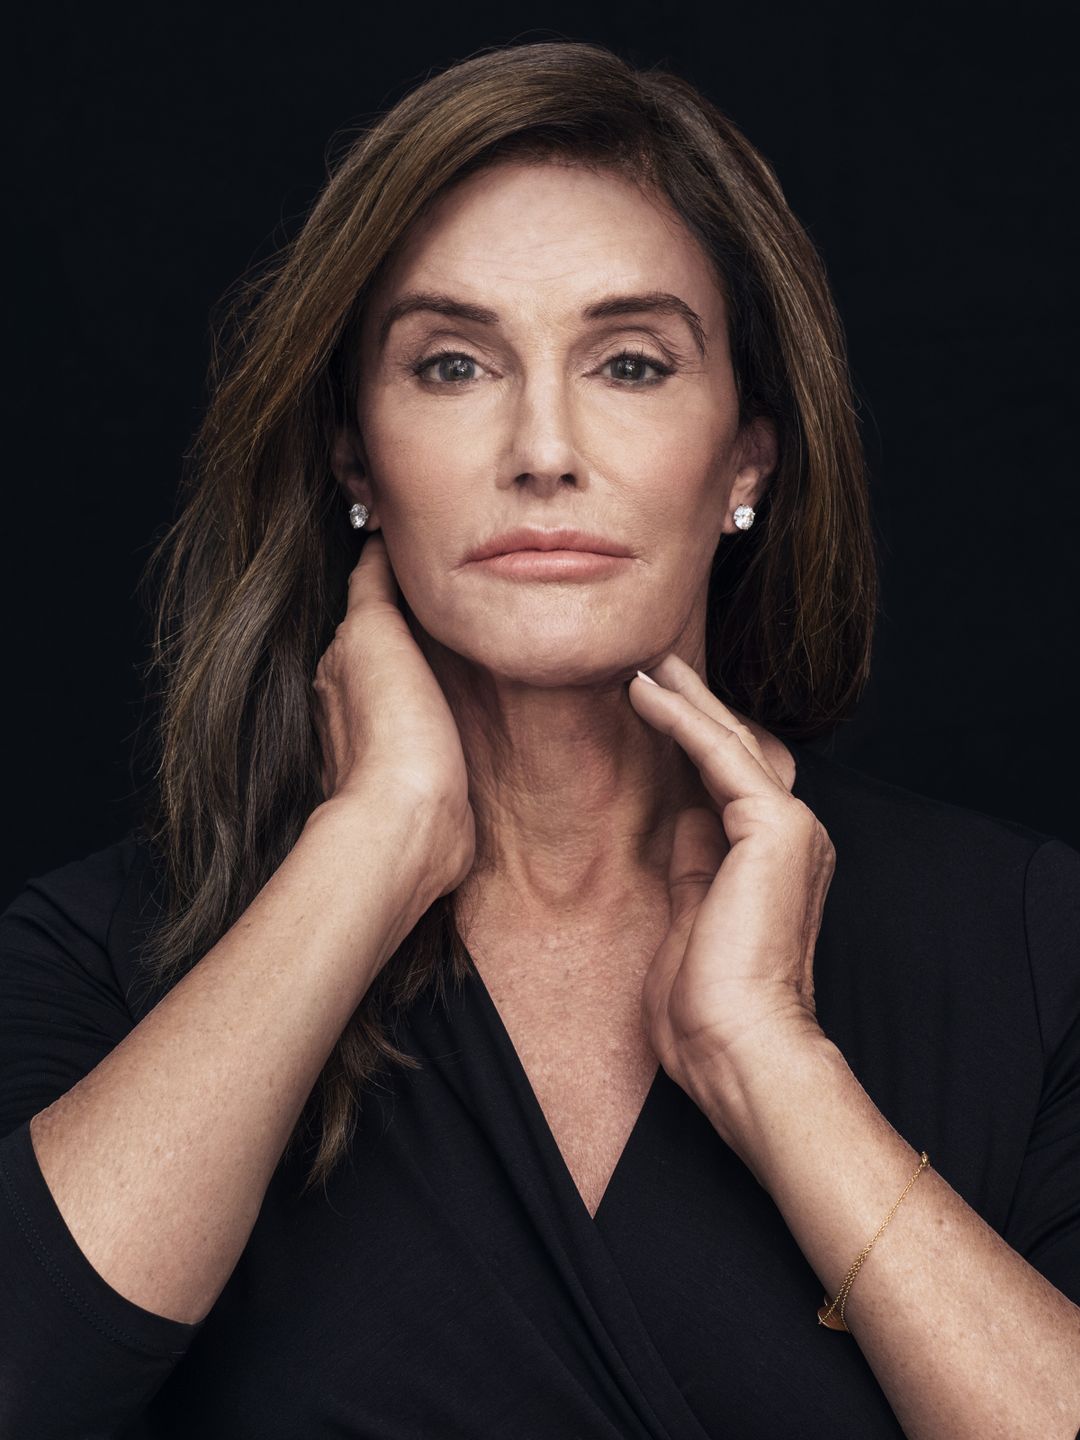 Caitlyn Jenner who are her parents